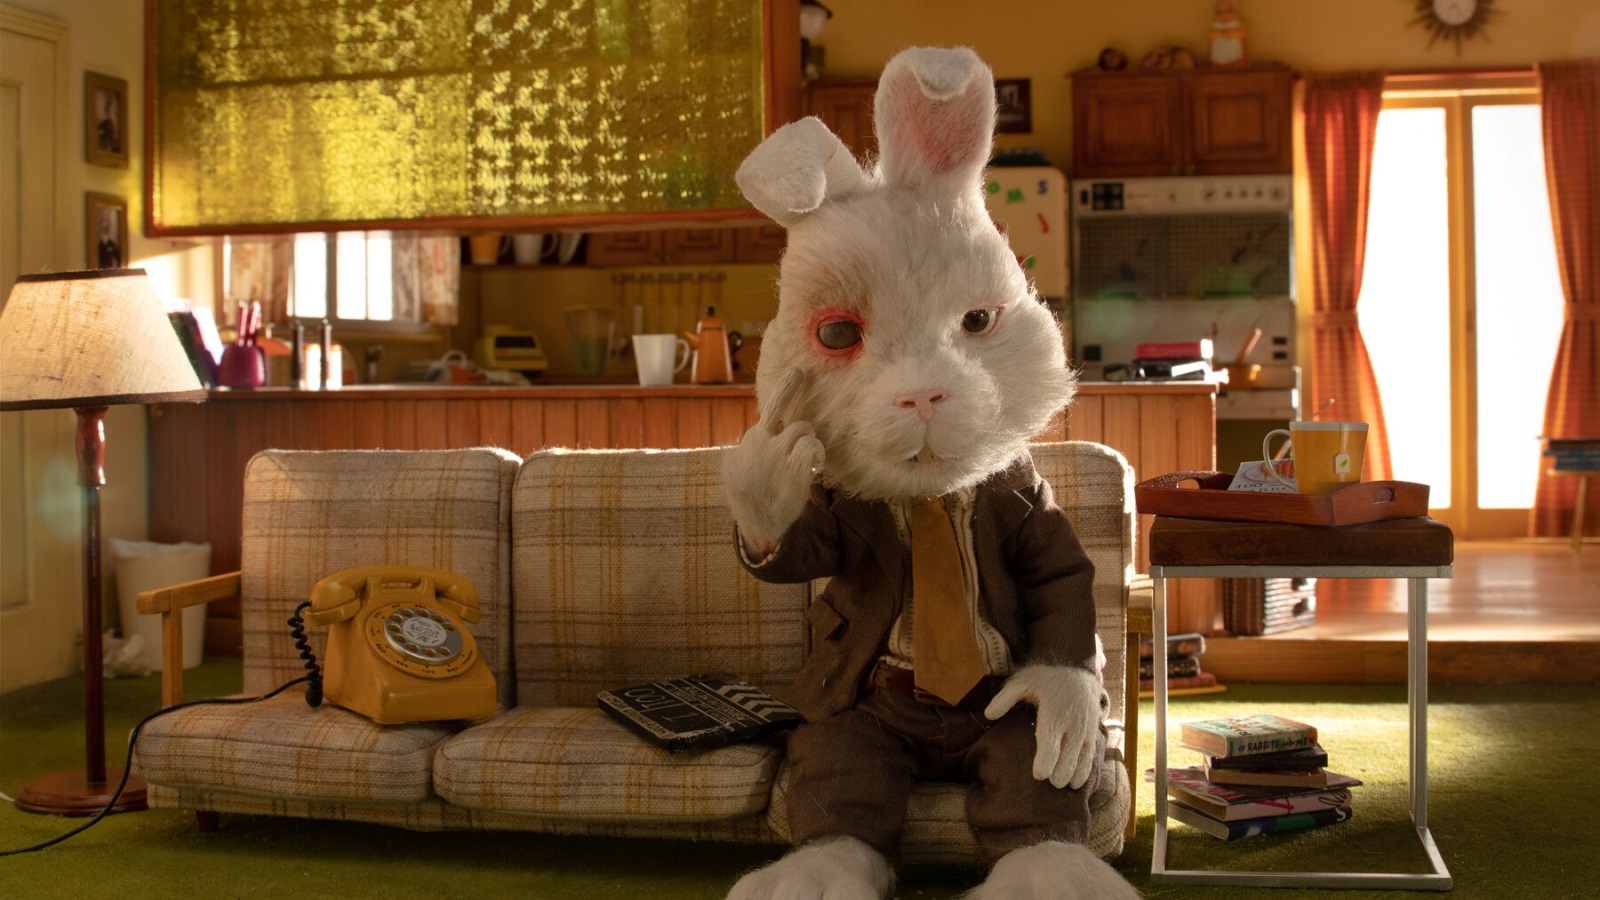 #TBT: Bunny Says He’s Happy with His Job as a Tester. However, His Body Disagrees